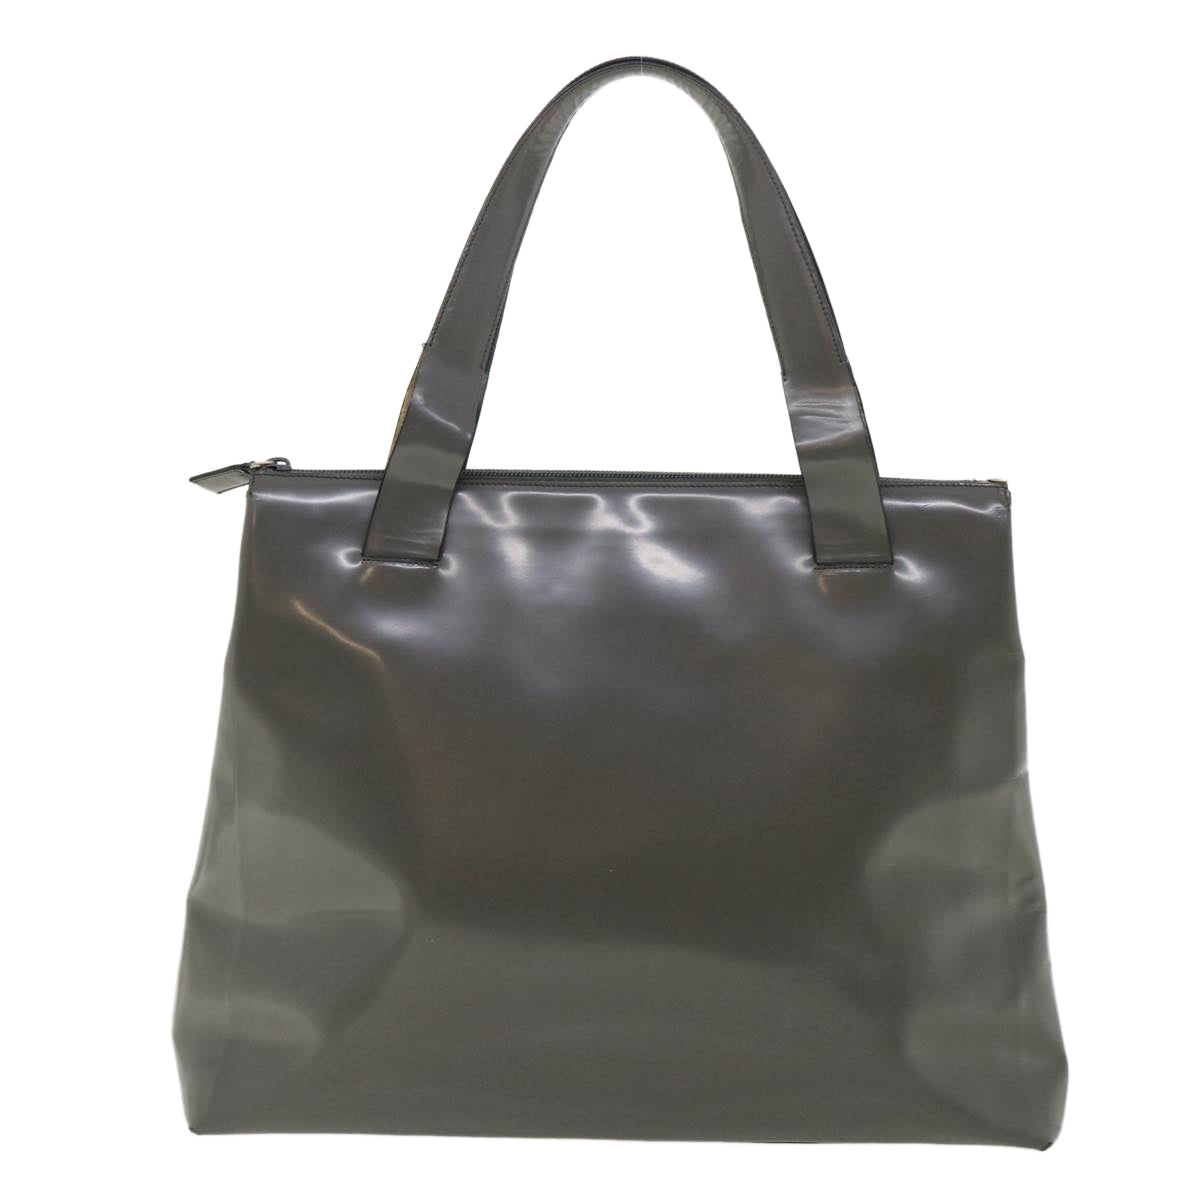 PRADA Tote Bag Patent Leather Gray Auth cl230